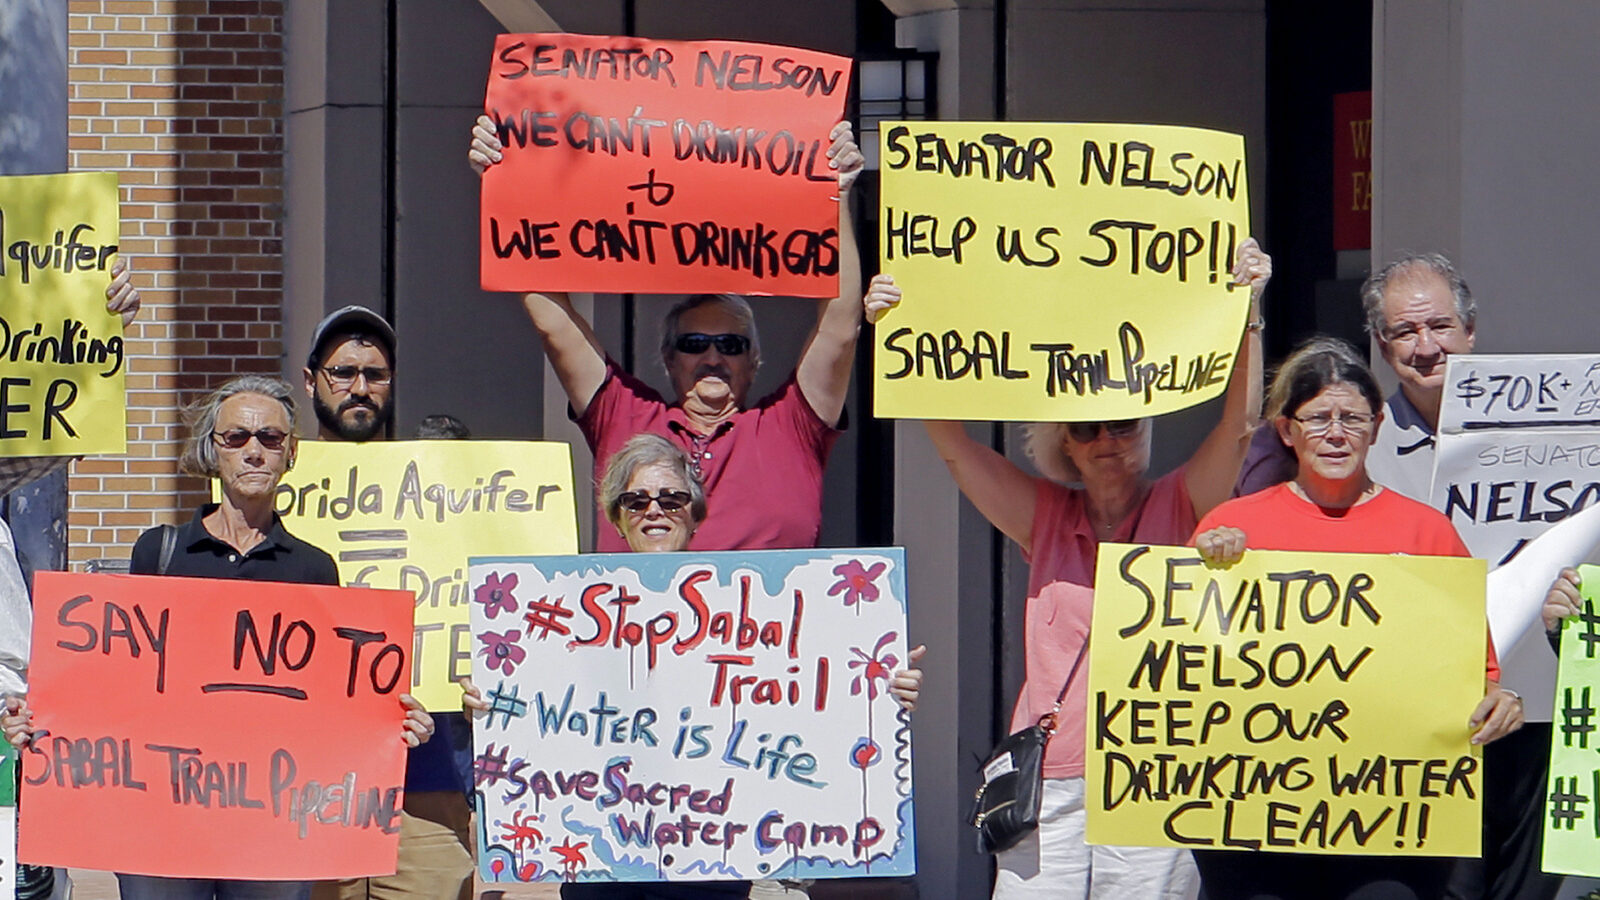 Activists hold signs as they protest the Sabal Trail pipeline, in front of the office of U.S. Sen. Bill Nelson, Tuesday, Feb. 14, 2017, in Coral Gables, Fla. The Sabal Trail is an underground natural gas pipeline project that originates in Alabama, stretches through Georgia and terminates in Florida. (AP/Alan Diaz)